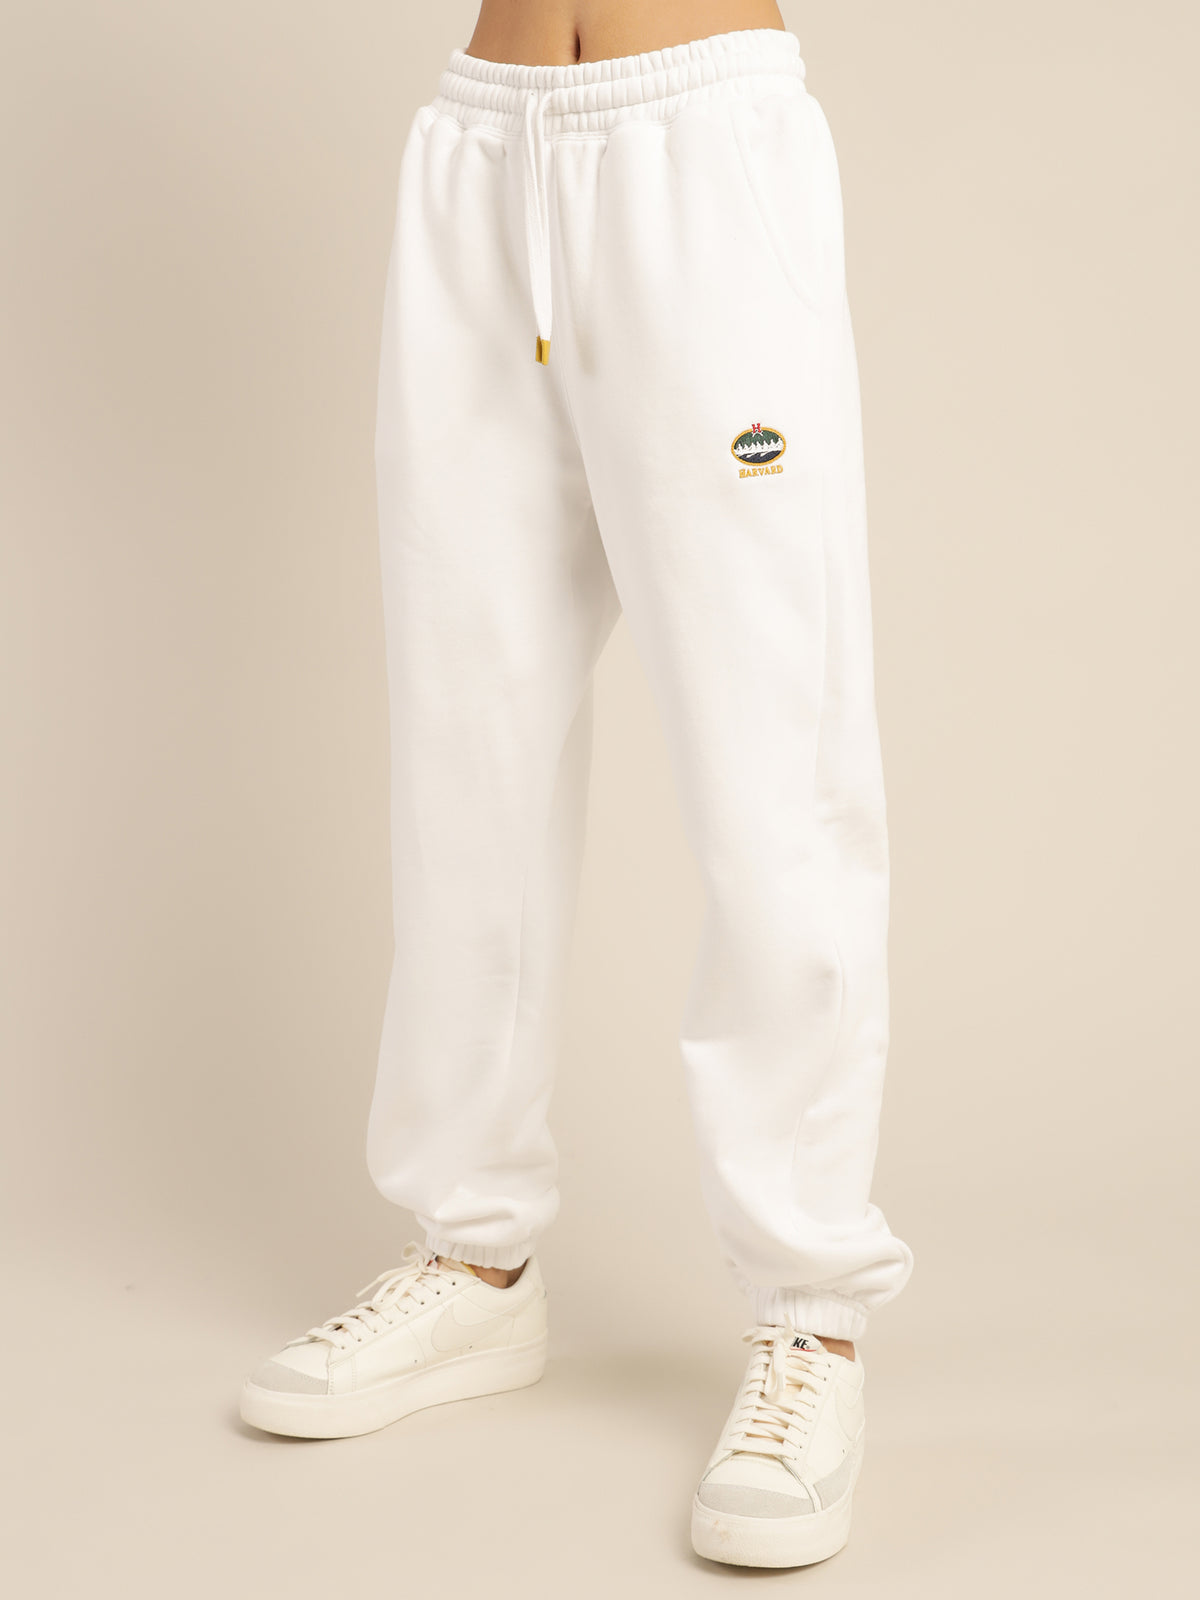 Harvard Rowing Crest Trackpants in White